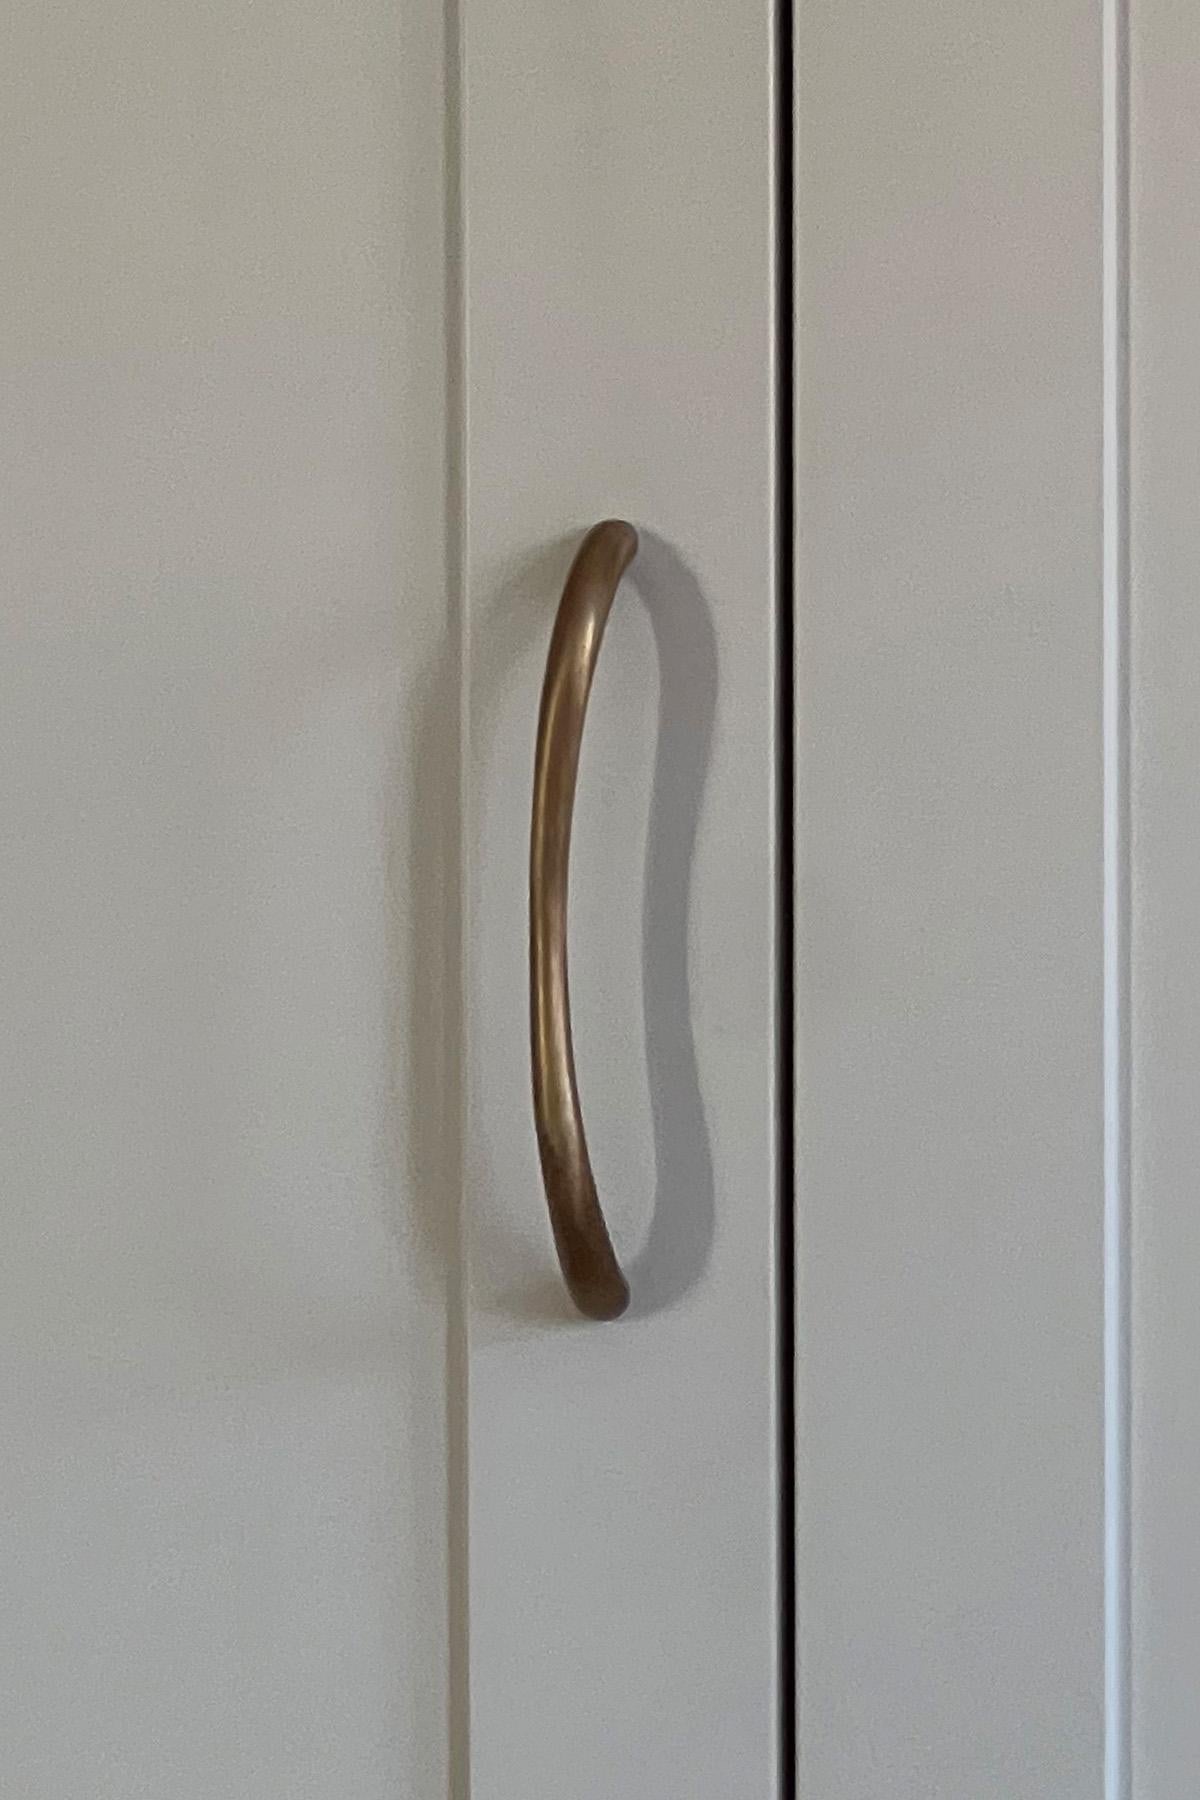 Organic Modern Contemporary Door Handle / Knob 'Suave' by Spaces Within, Dark Brass For Sale